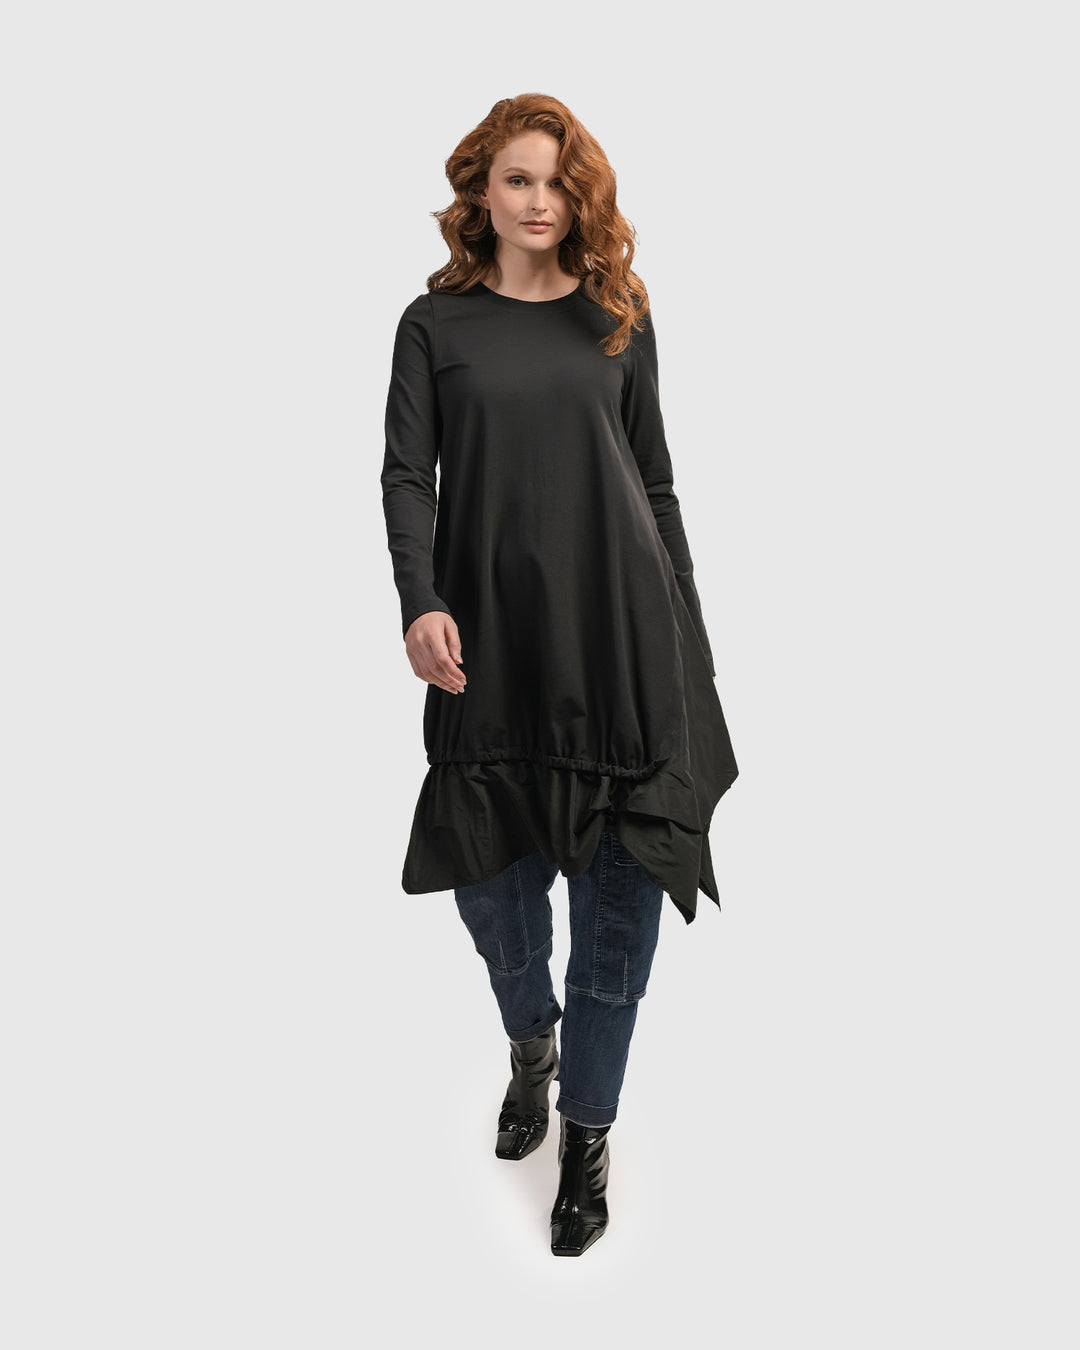 A woman wearing the ALEMBIKA Urban New Wave Tunic Top in Black with a ruffled hem and long sleeves.